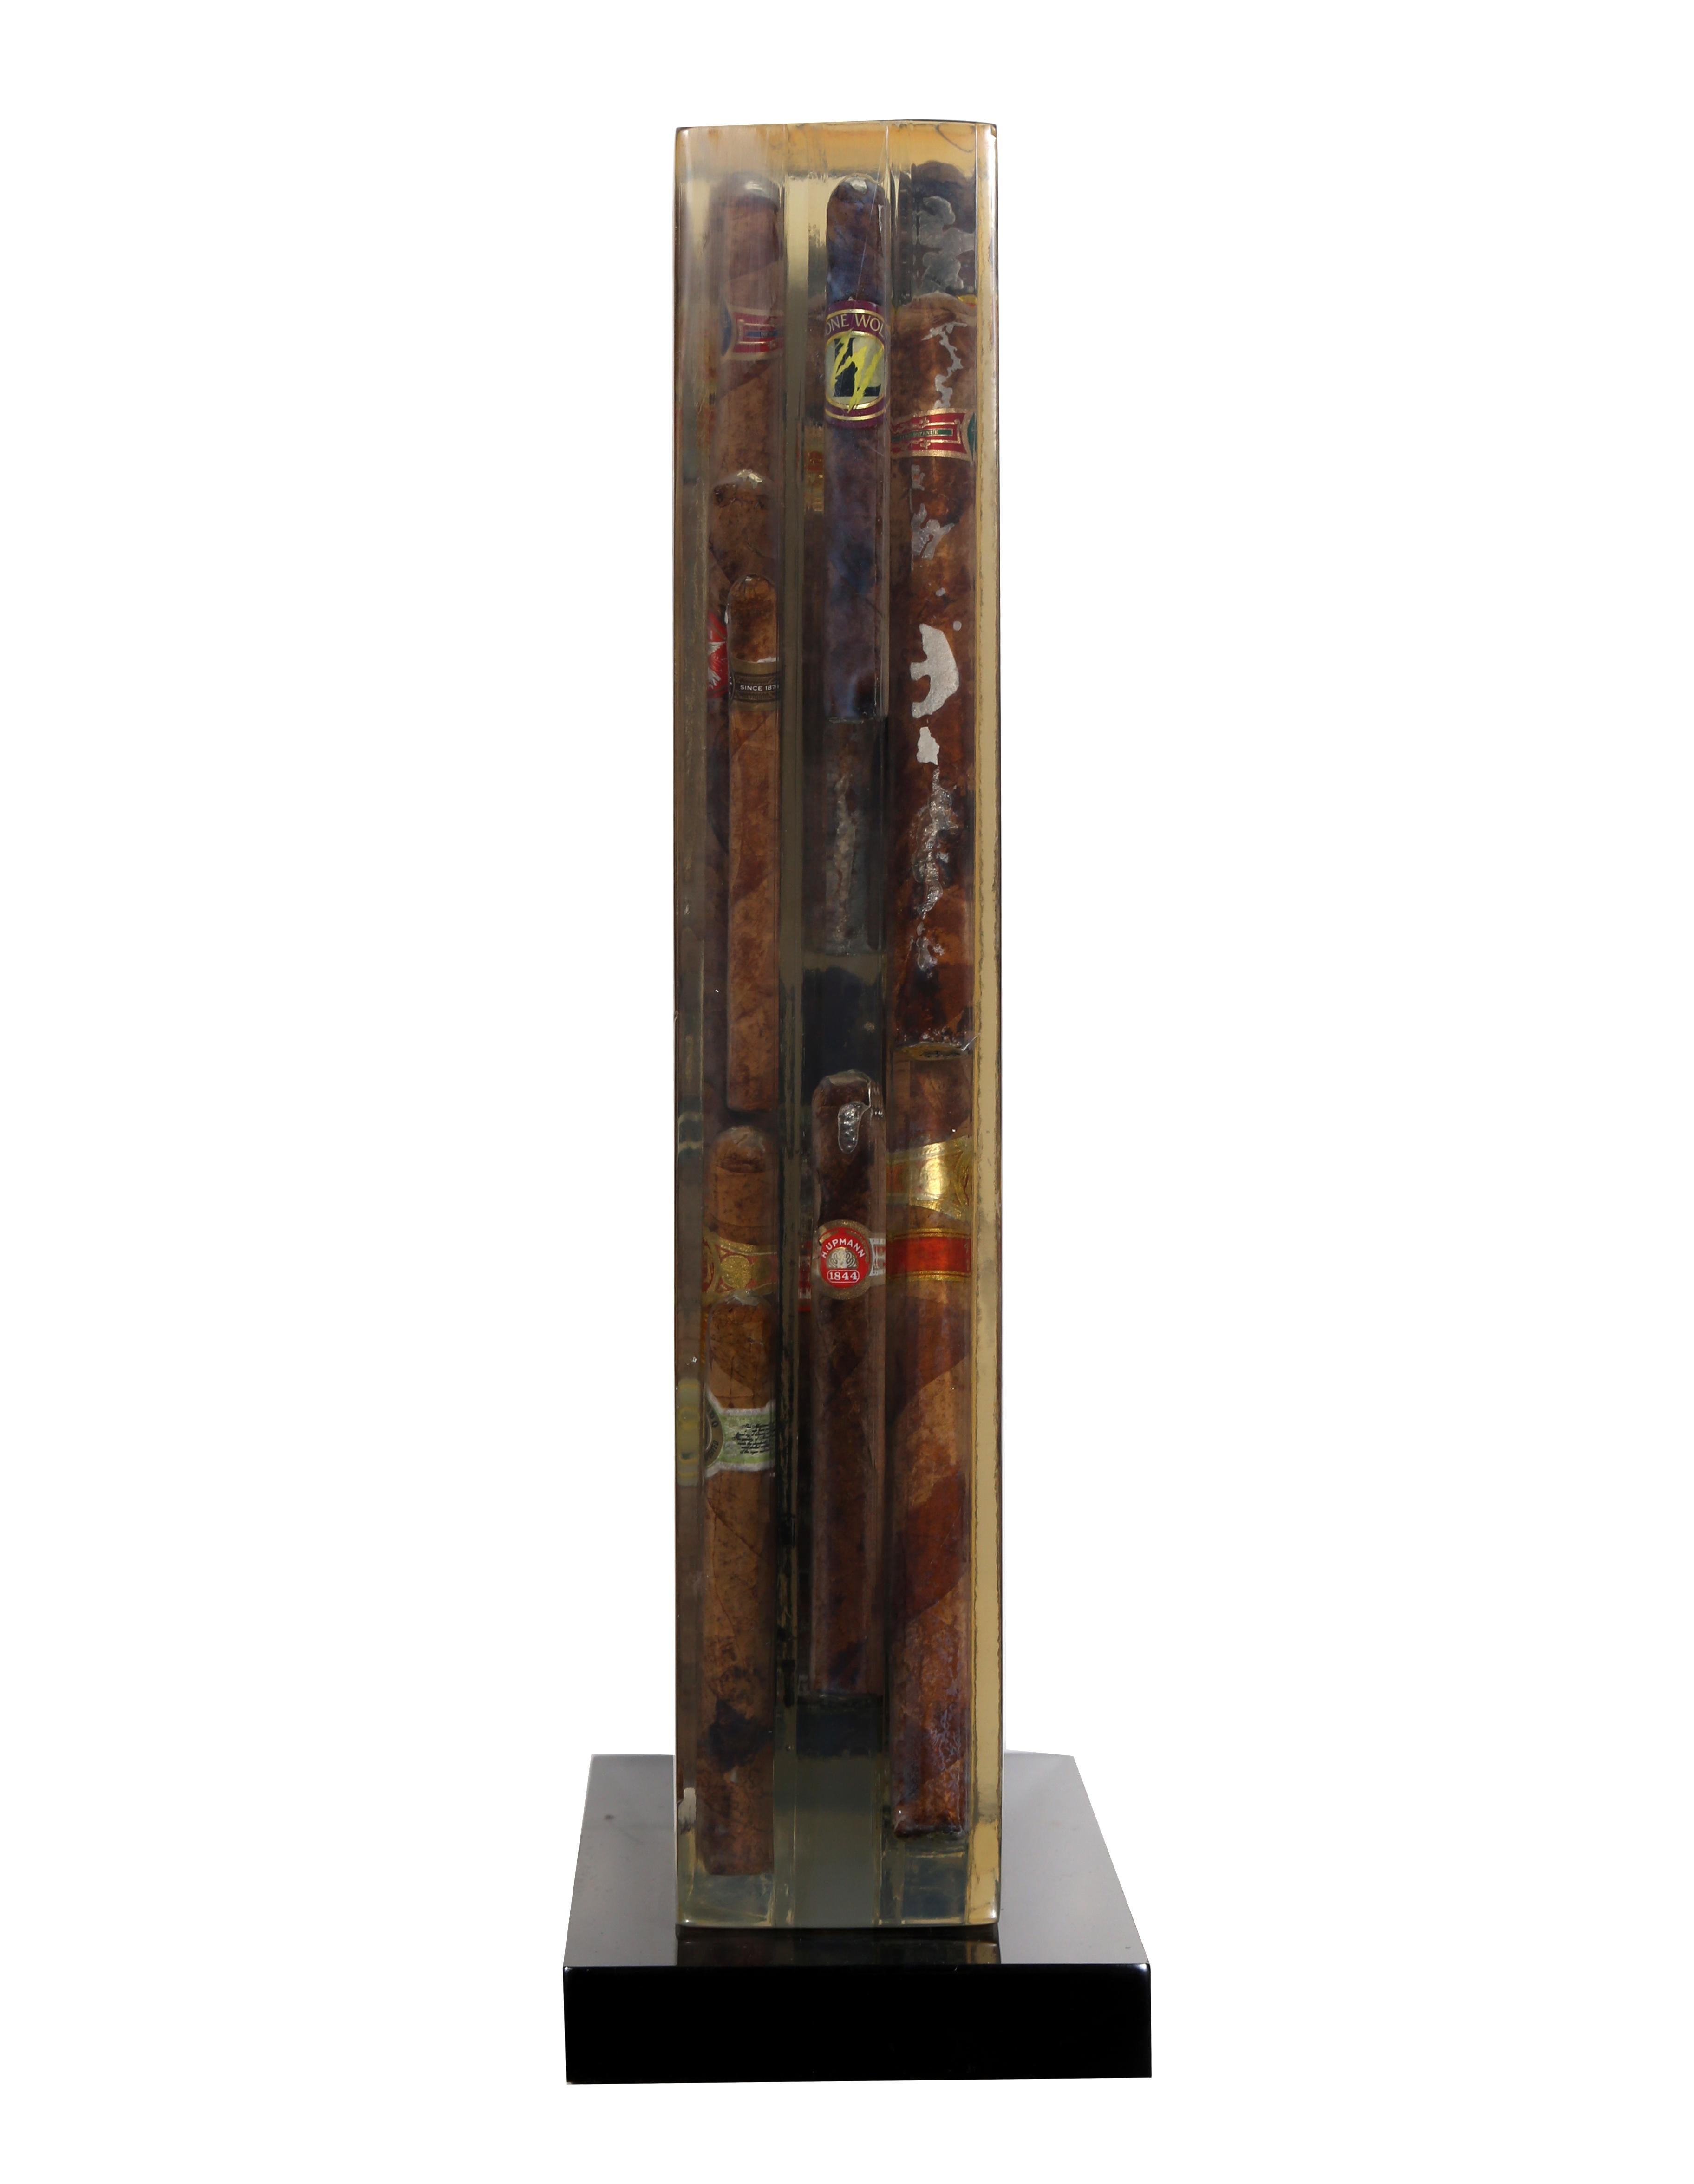 Waiting to Exhale, Accumulation Cigar Sculpture by Arman - Black Abstract Sculpture by Fernandez Arman